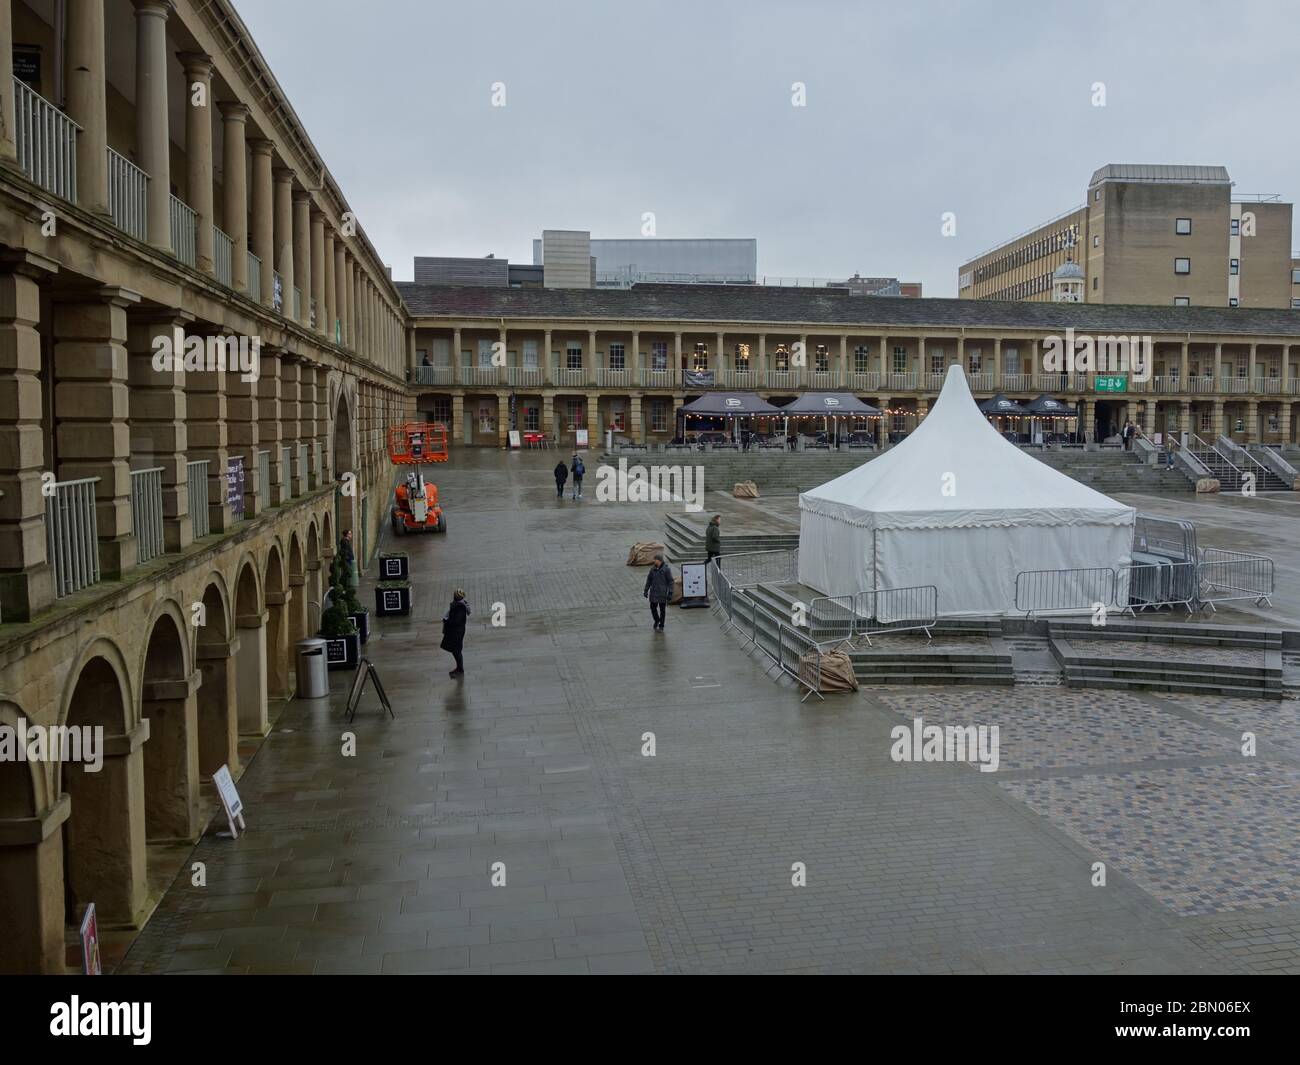 The 18th century Piece Hall in Halifax, West Yorkshire, a Grade I listed building which was reopened in 2017 following a £19m regeneration. Stock Photo